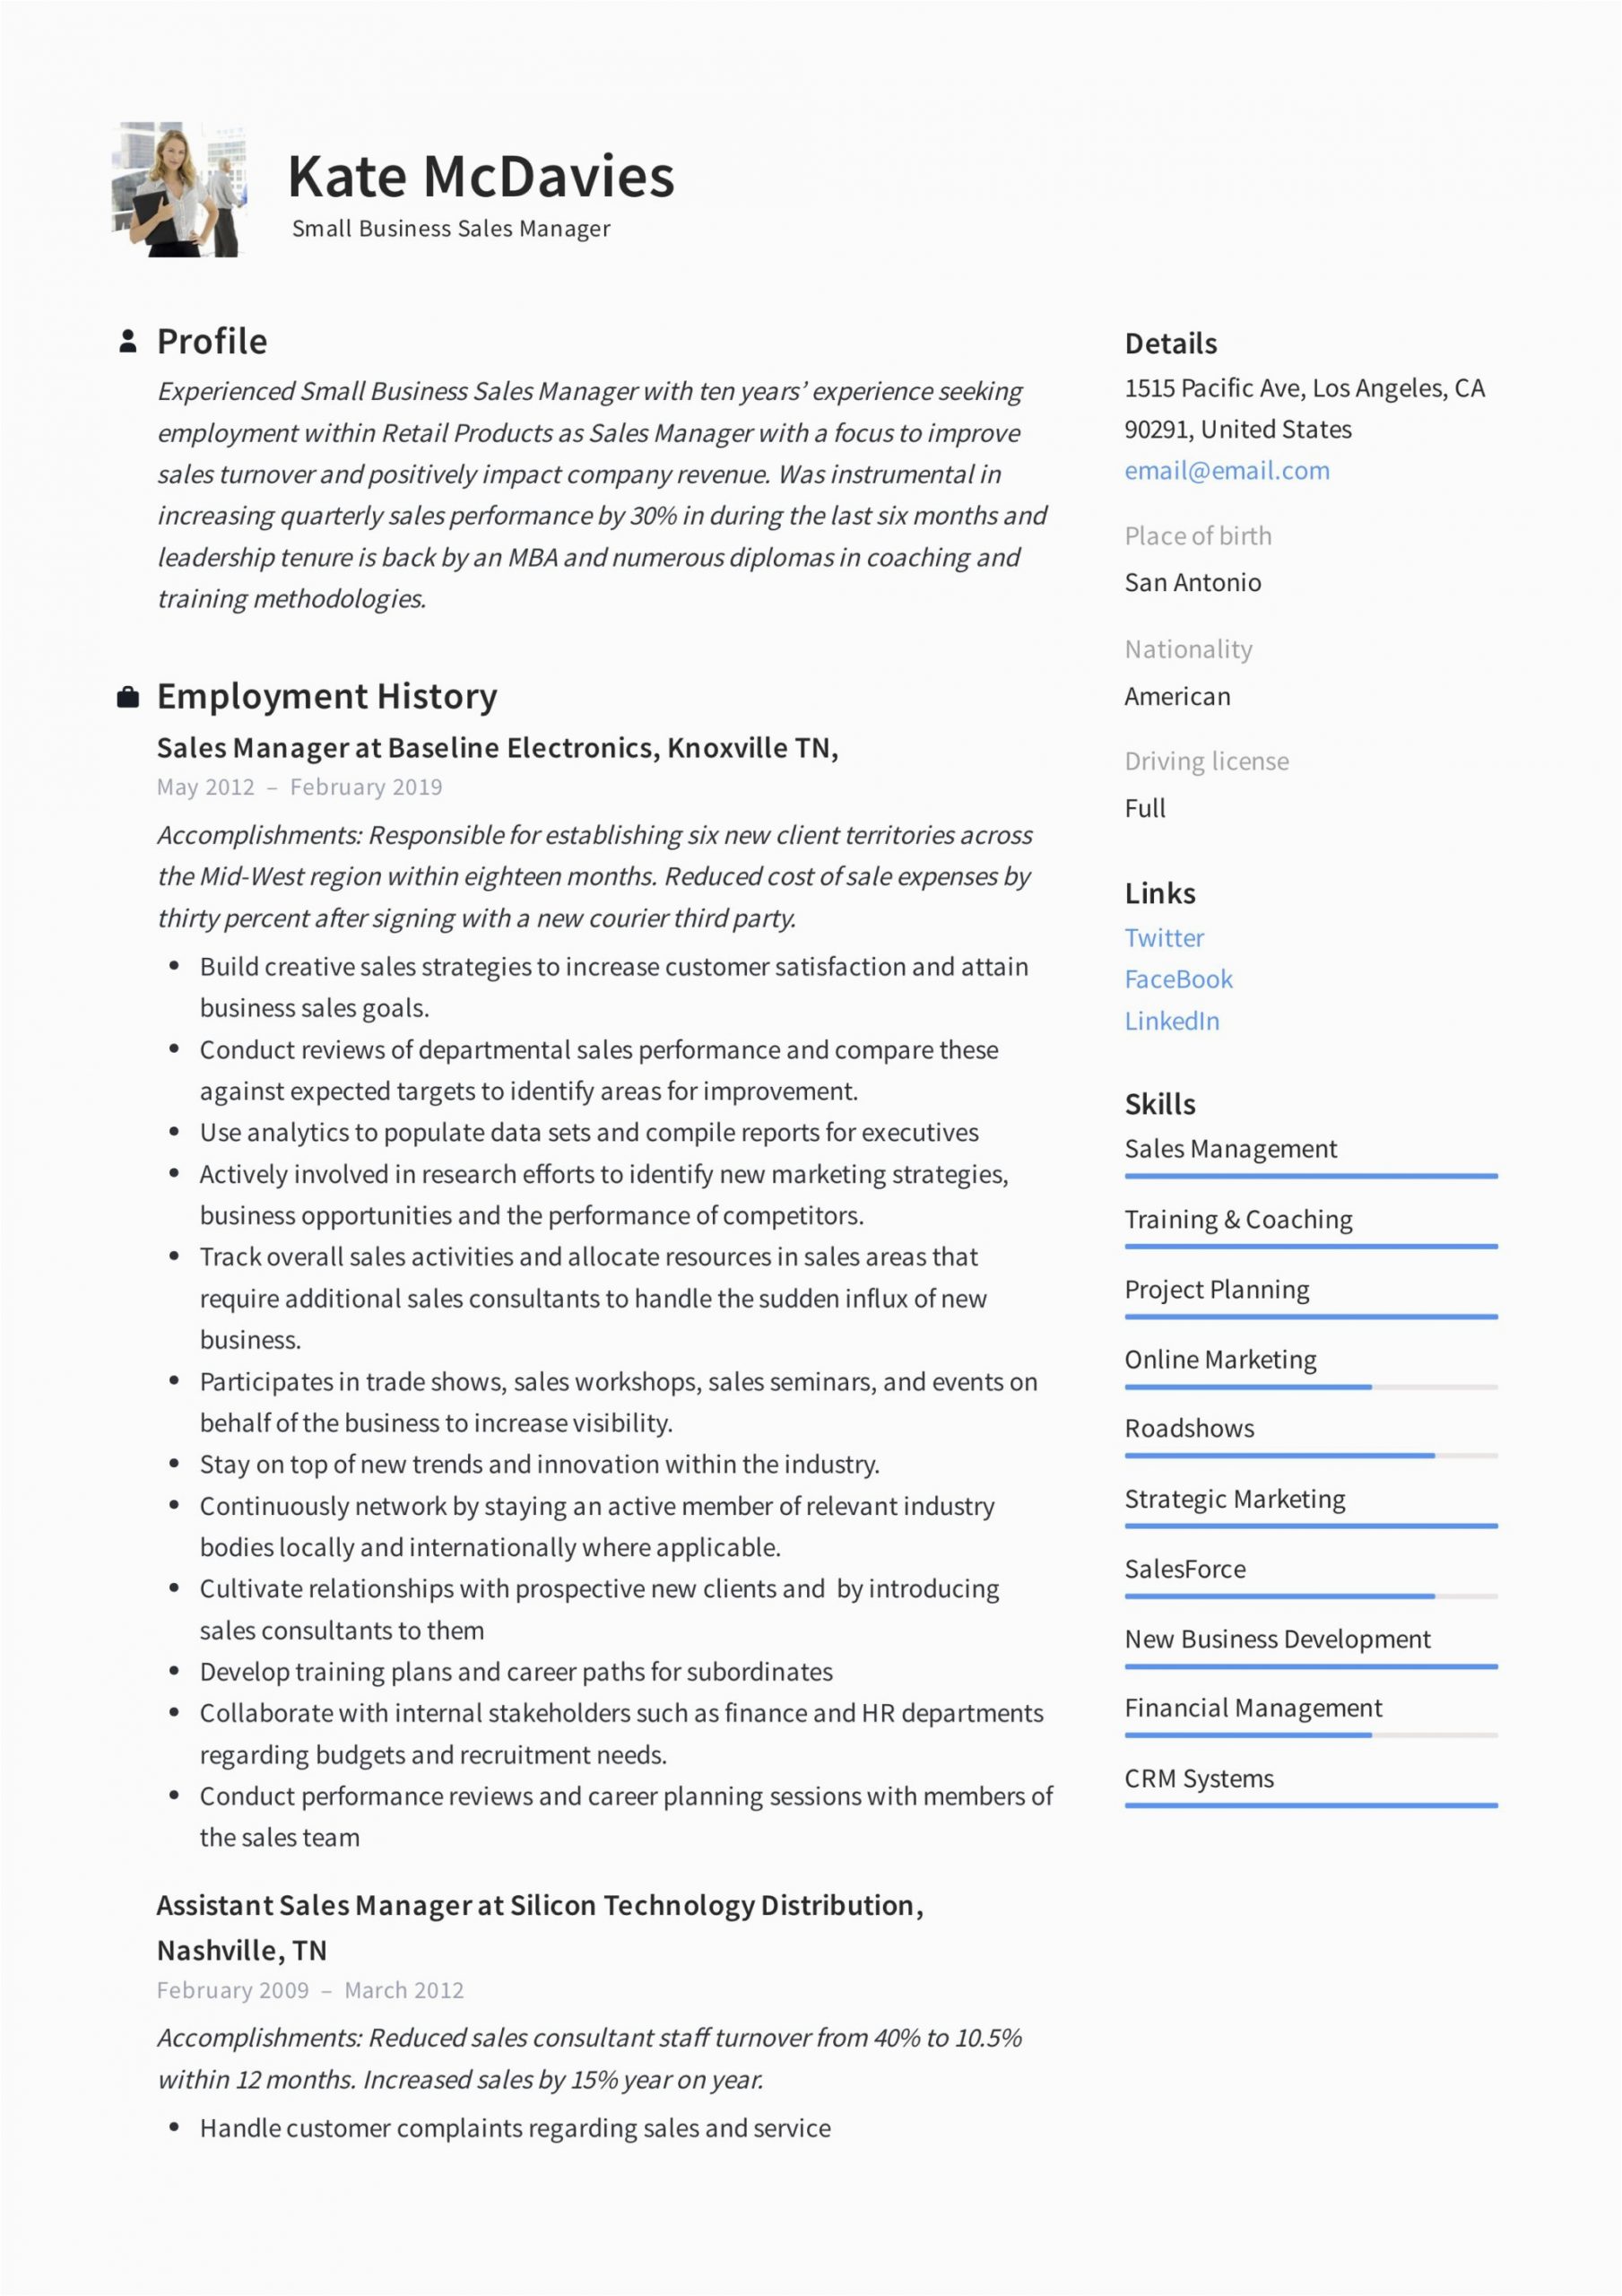 Sample Resume for Sales Manager Position Guide Small Business Sales Manager Resume [x12] Sample